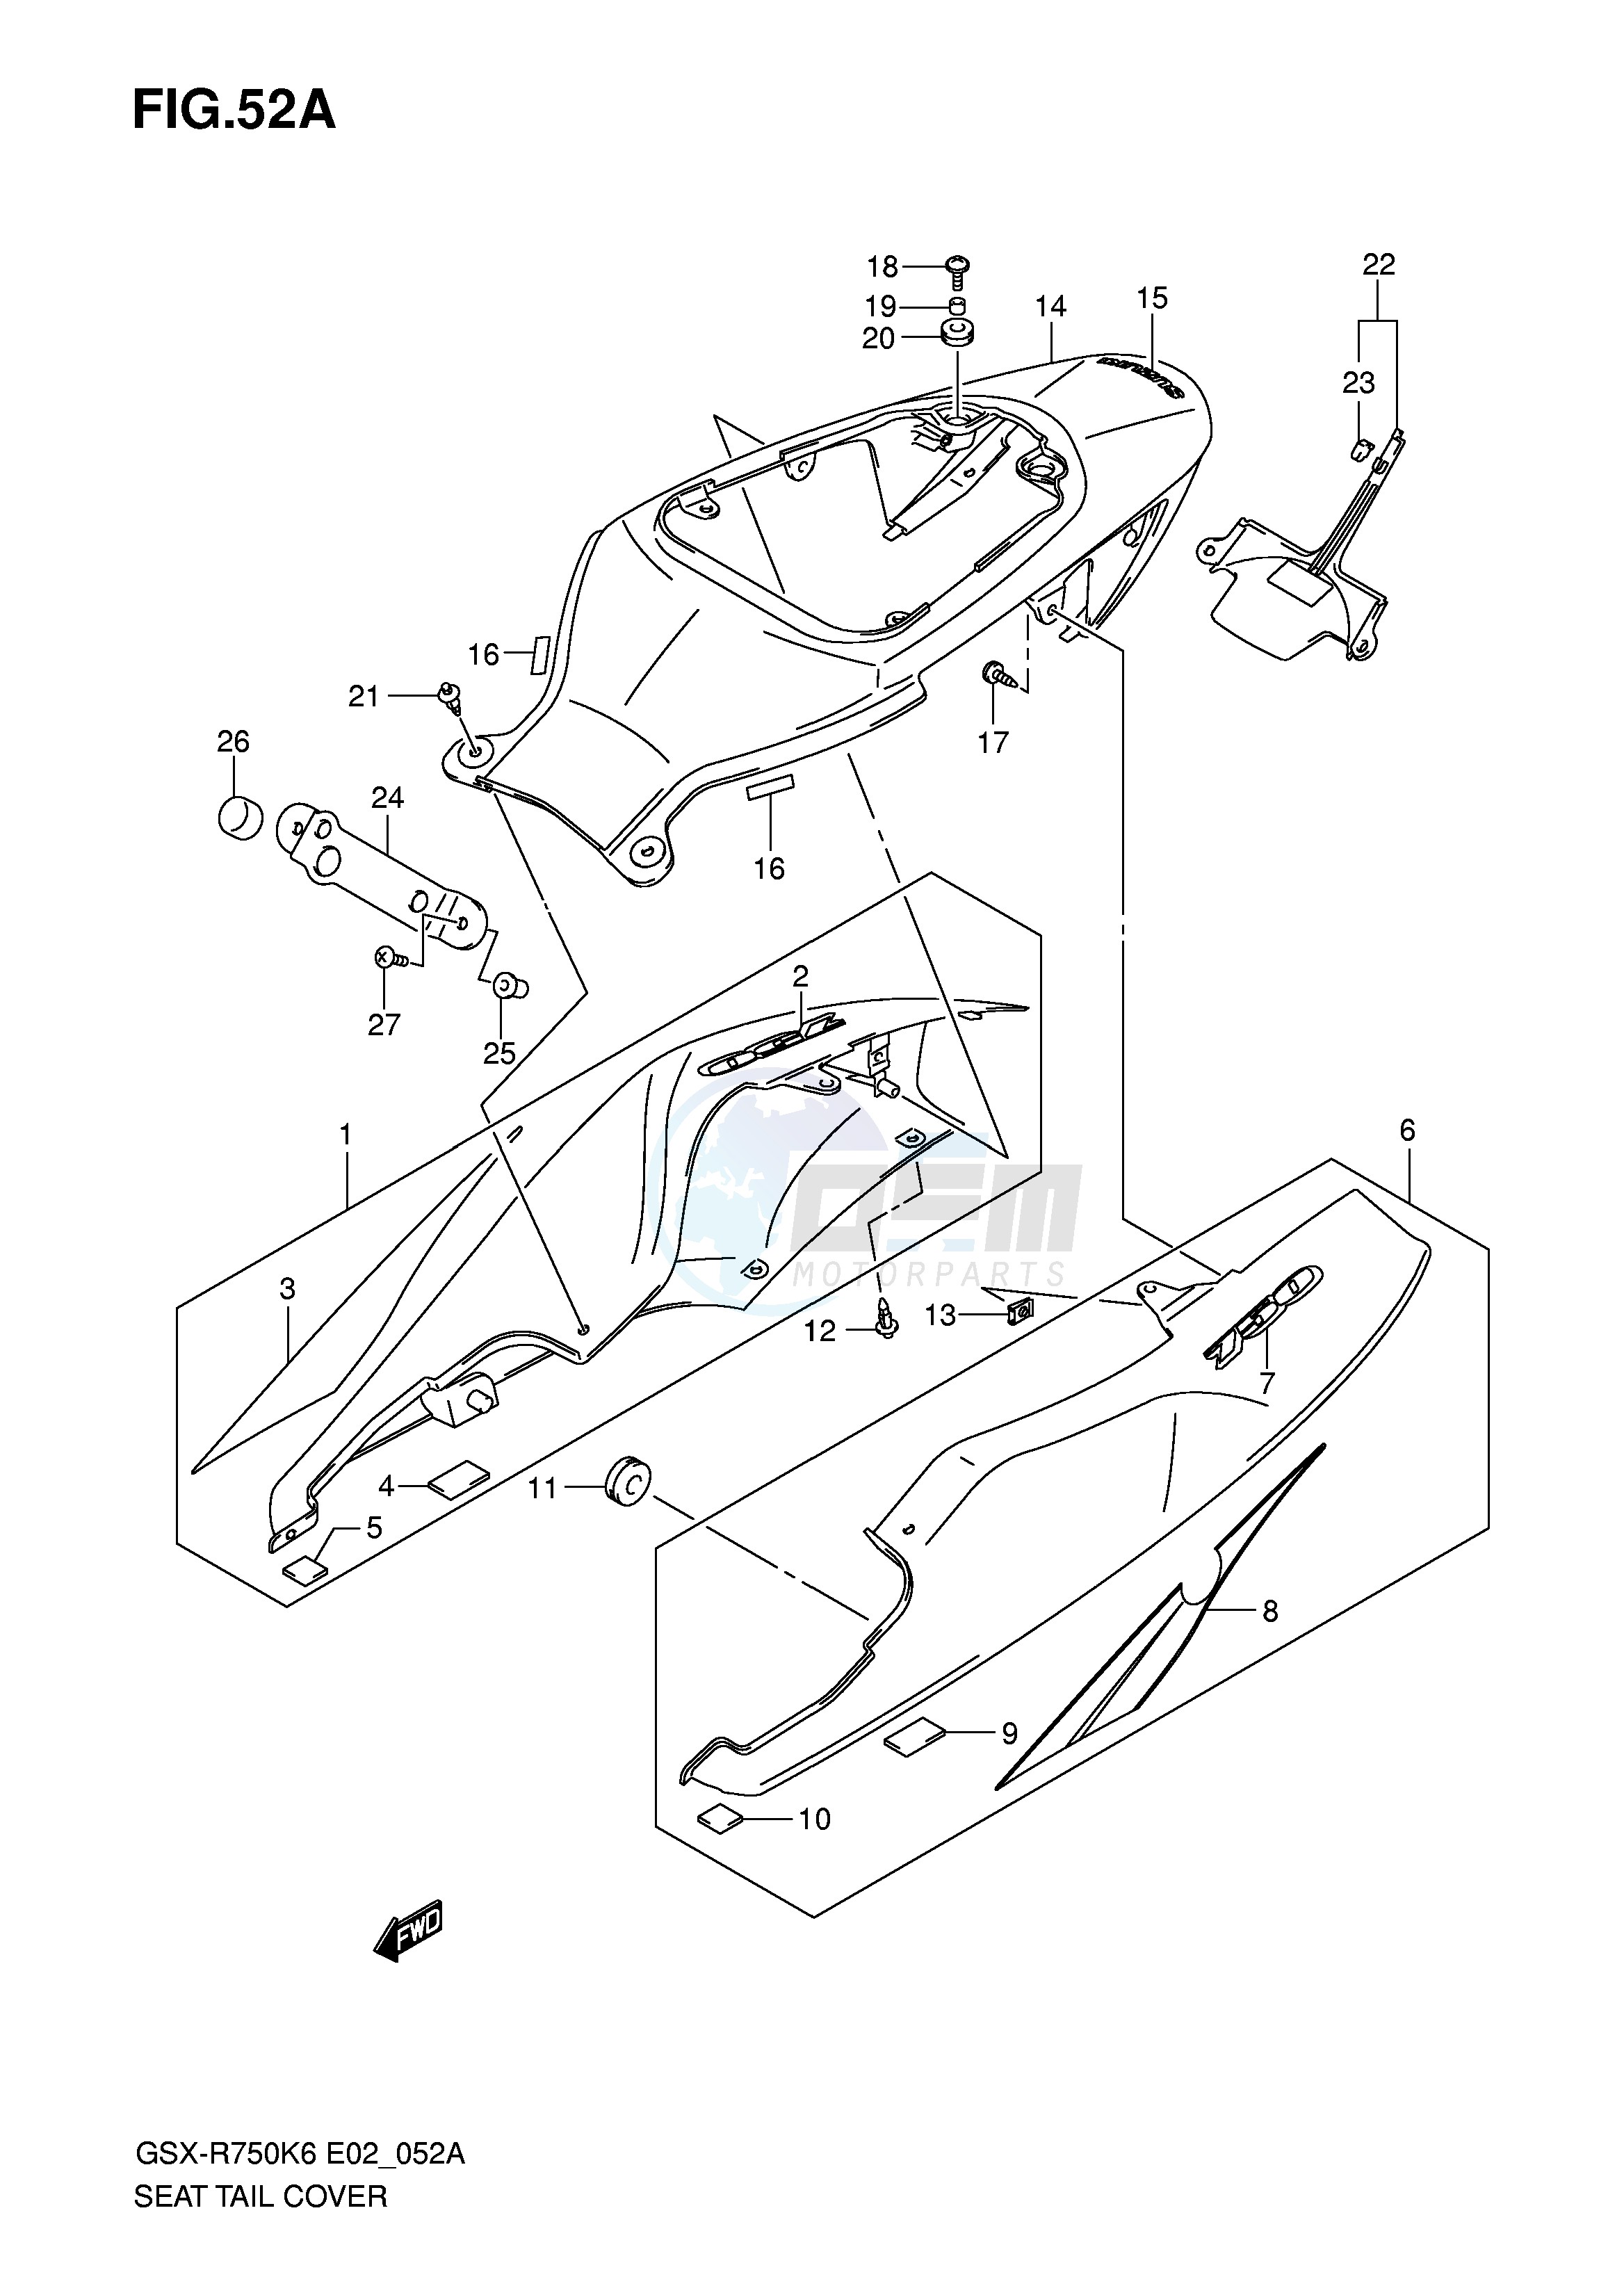 SEAT TAIL COVER (MODEL K7) blueprint